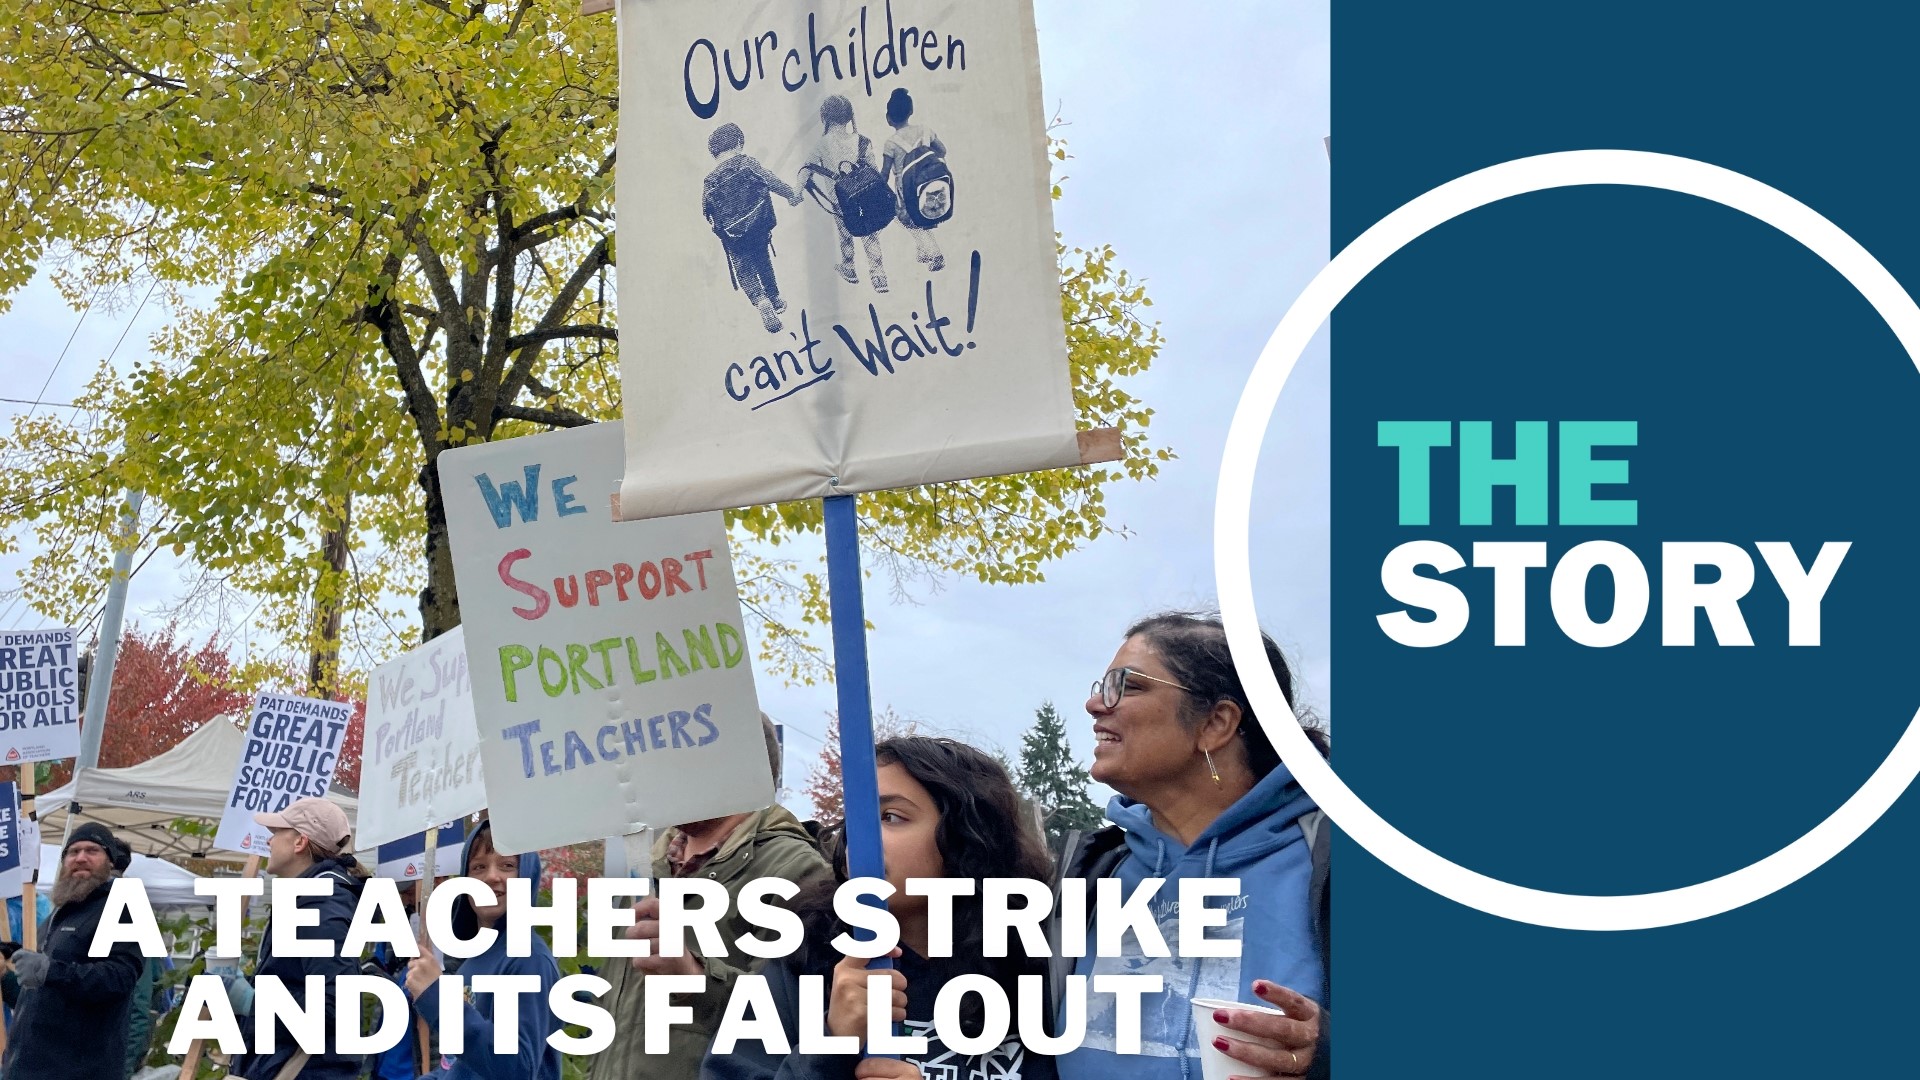 While Portland Public Schools did make some concessions, the union fell short on many of its demands — and the downstream impacts of the strike are still uncertain.